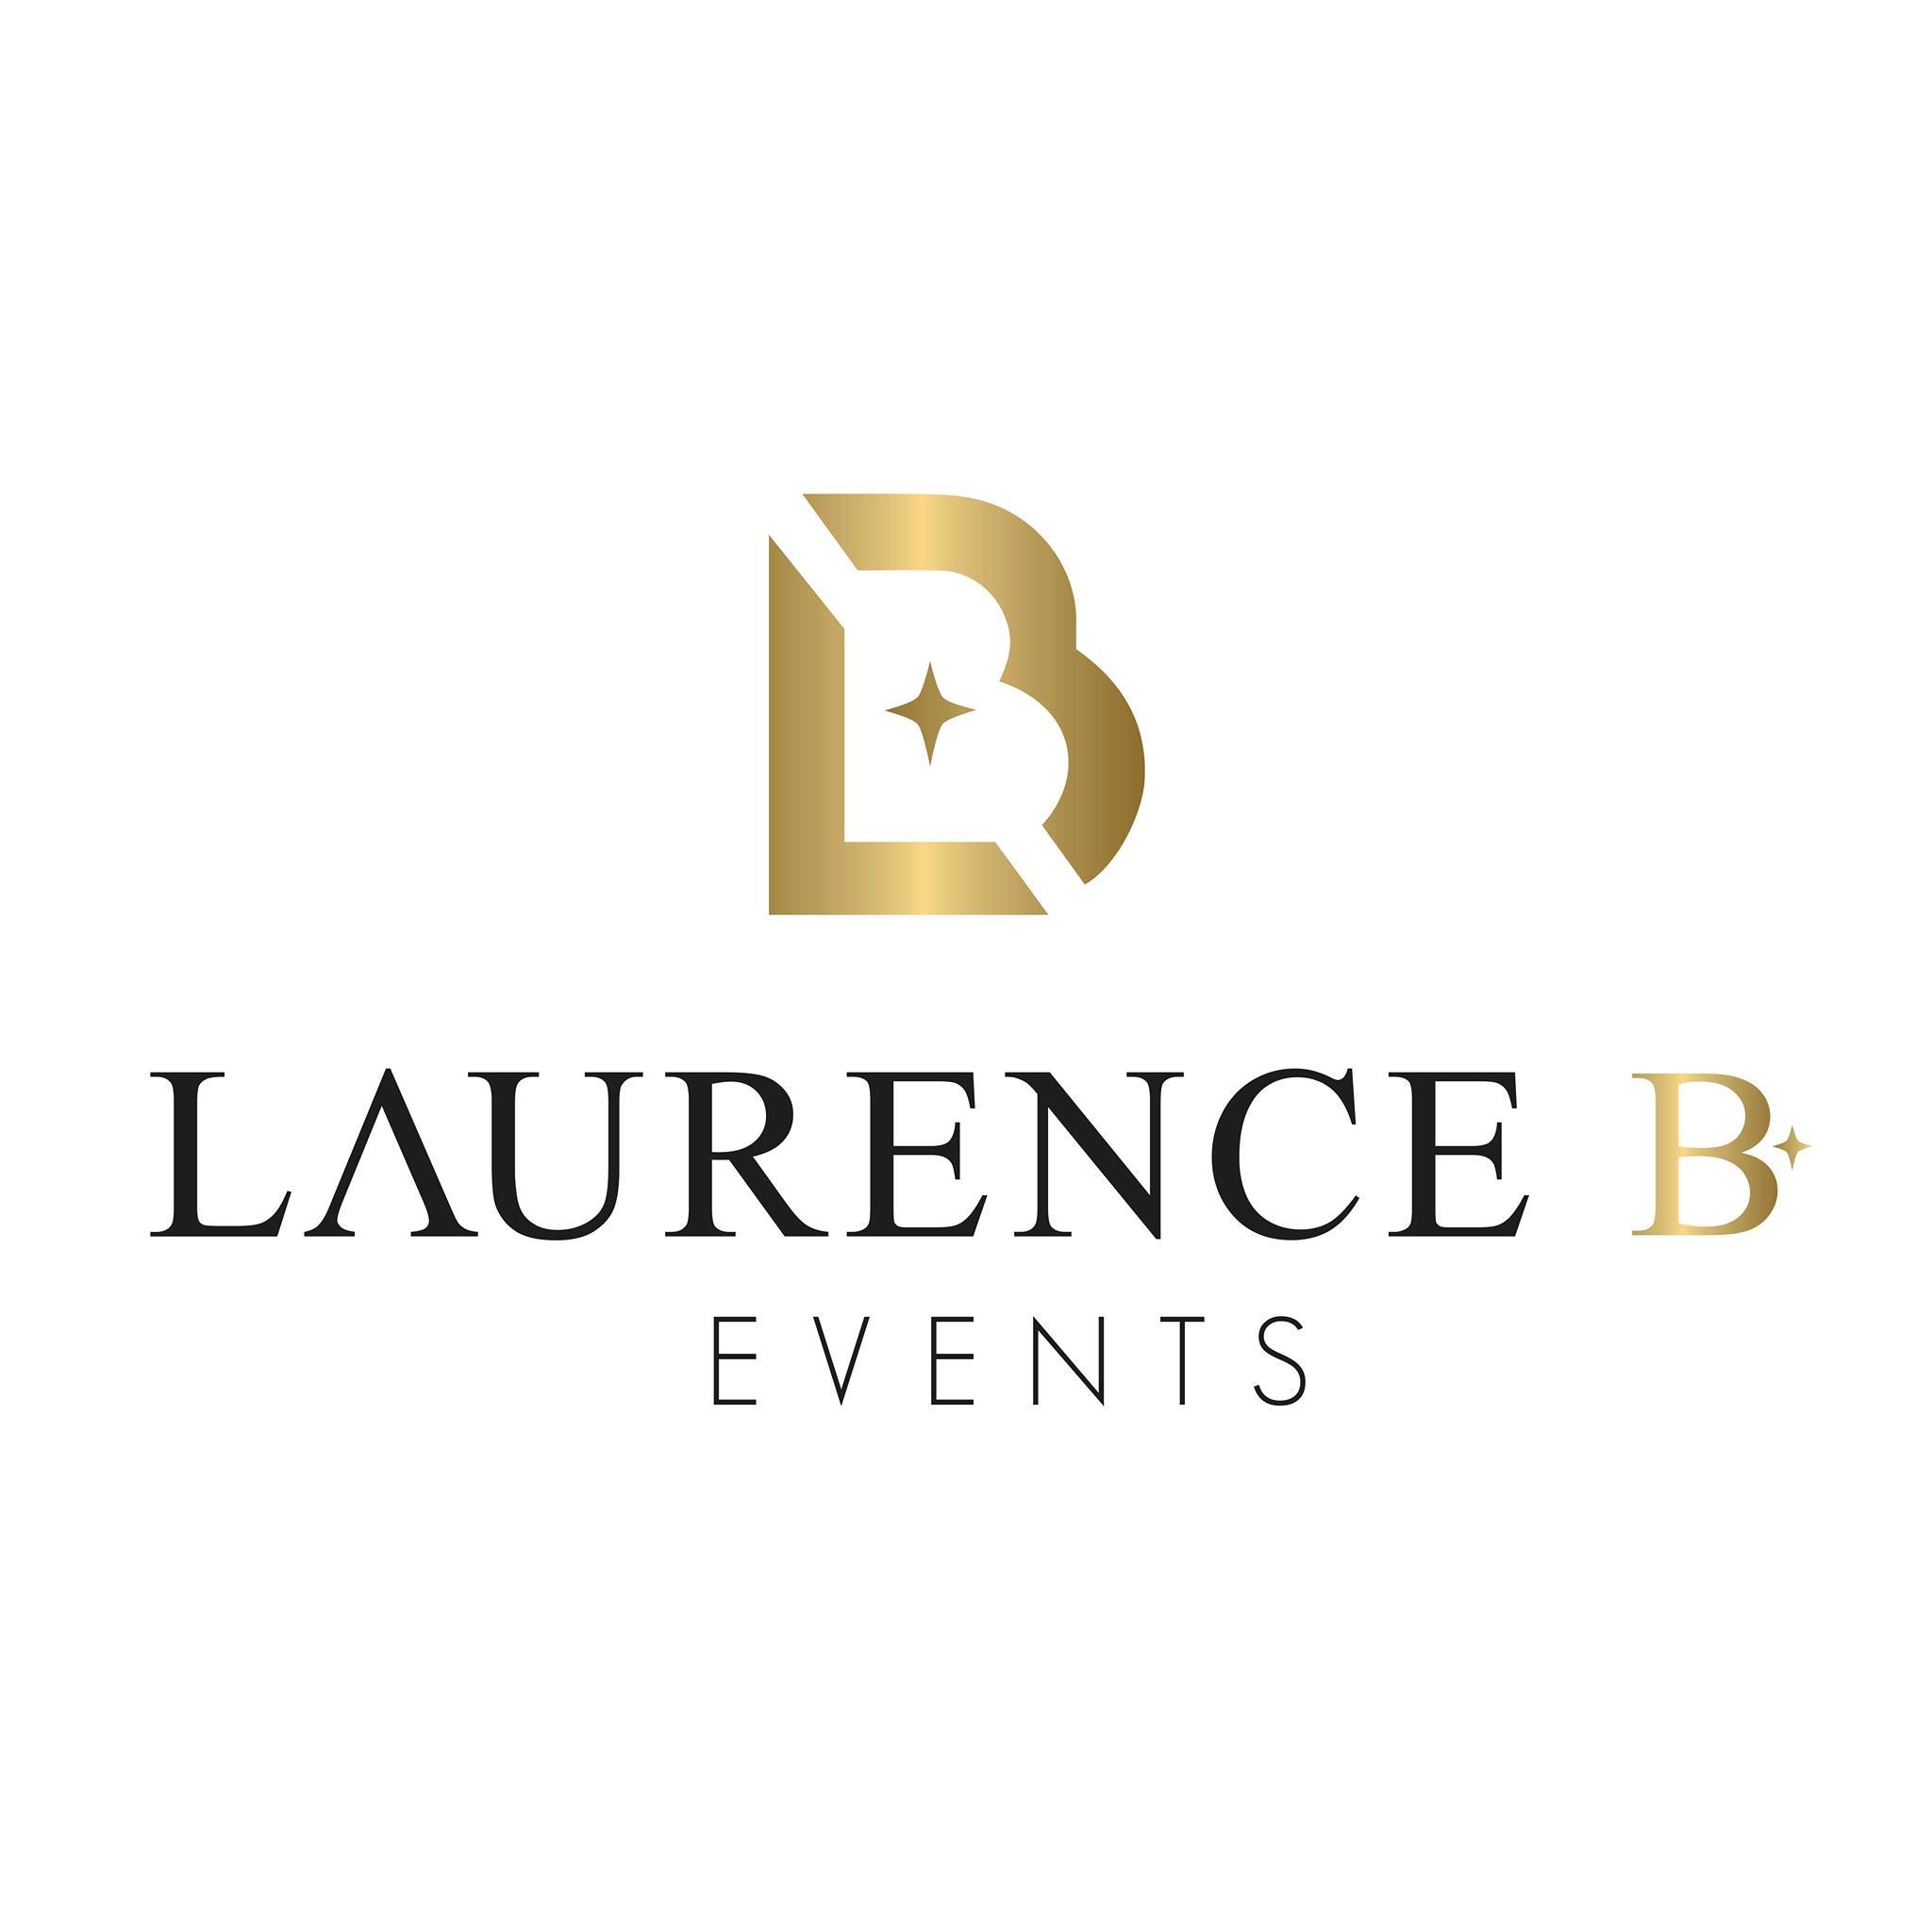 Laurence B Events